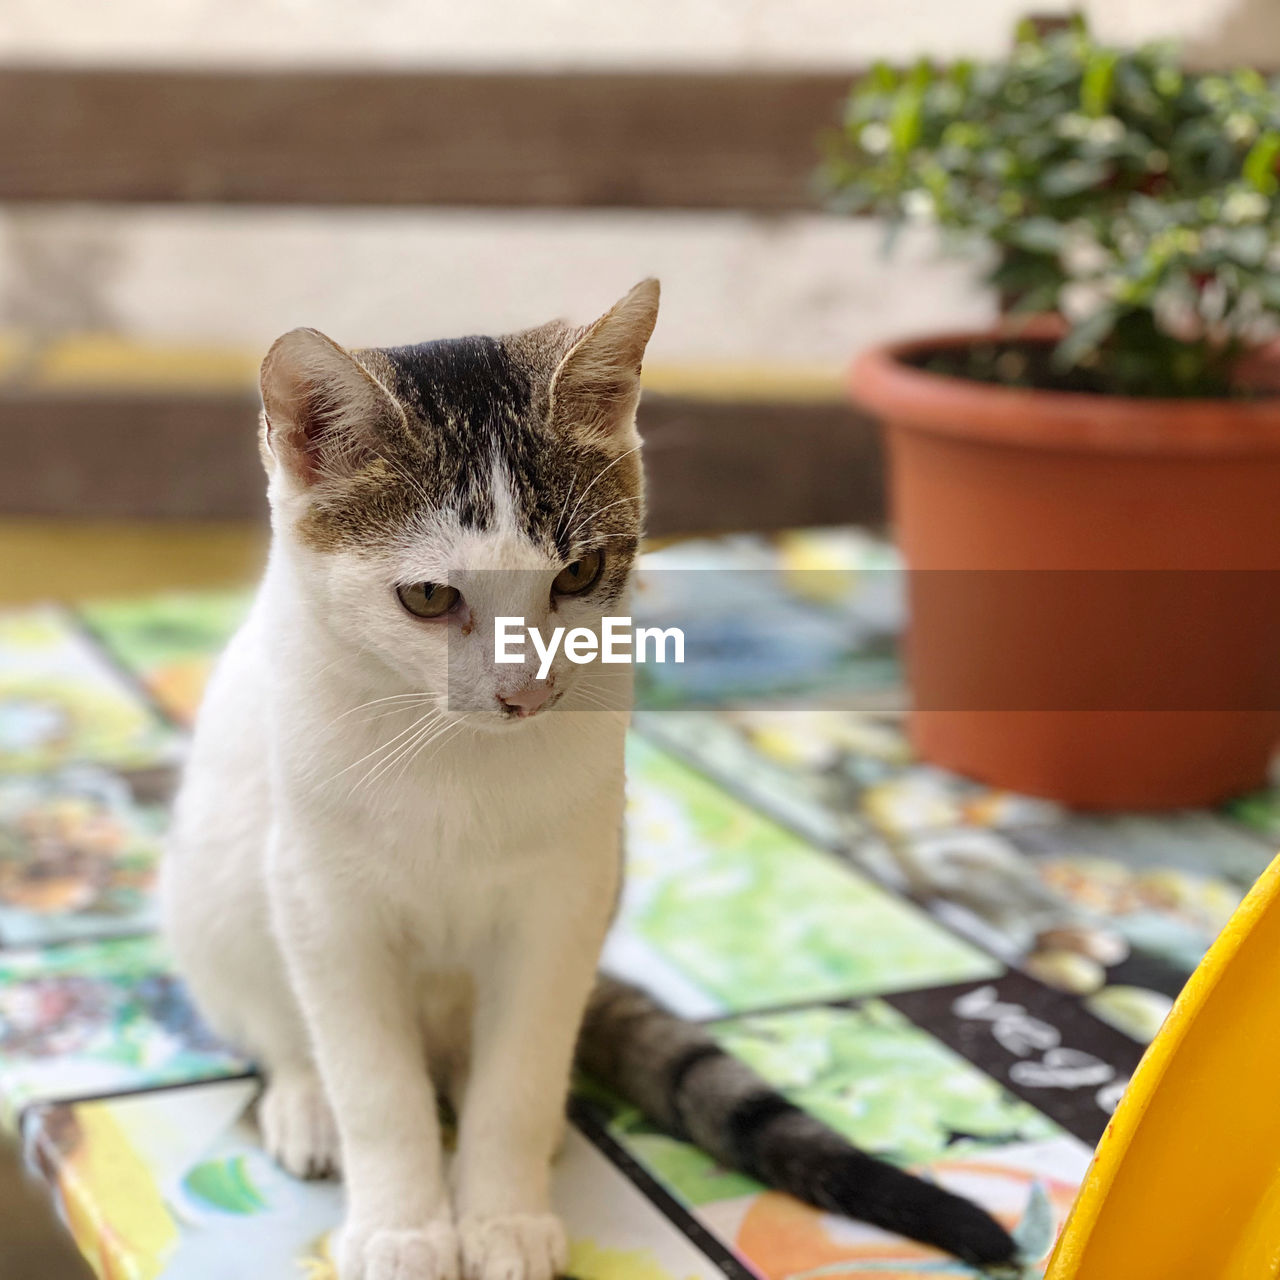 CLOSE-UP PORTRAIT OF CAT BY POTTED PLANT AT FLOWER POT